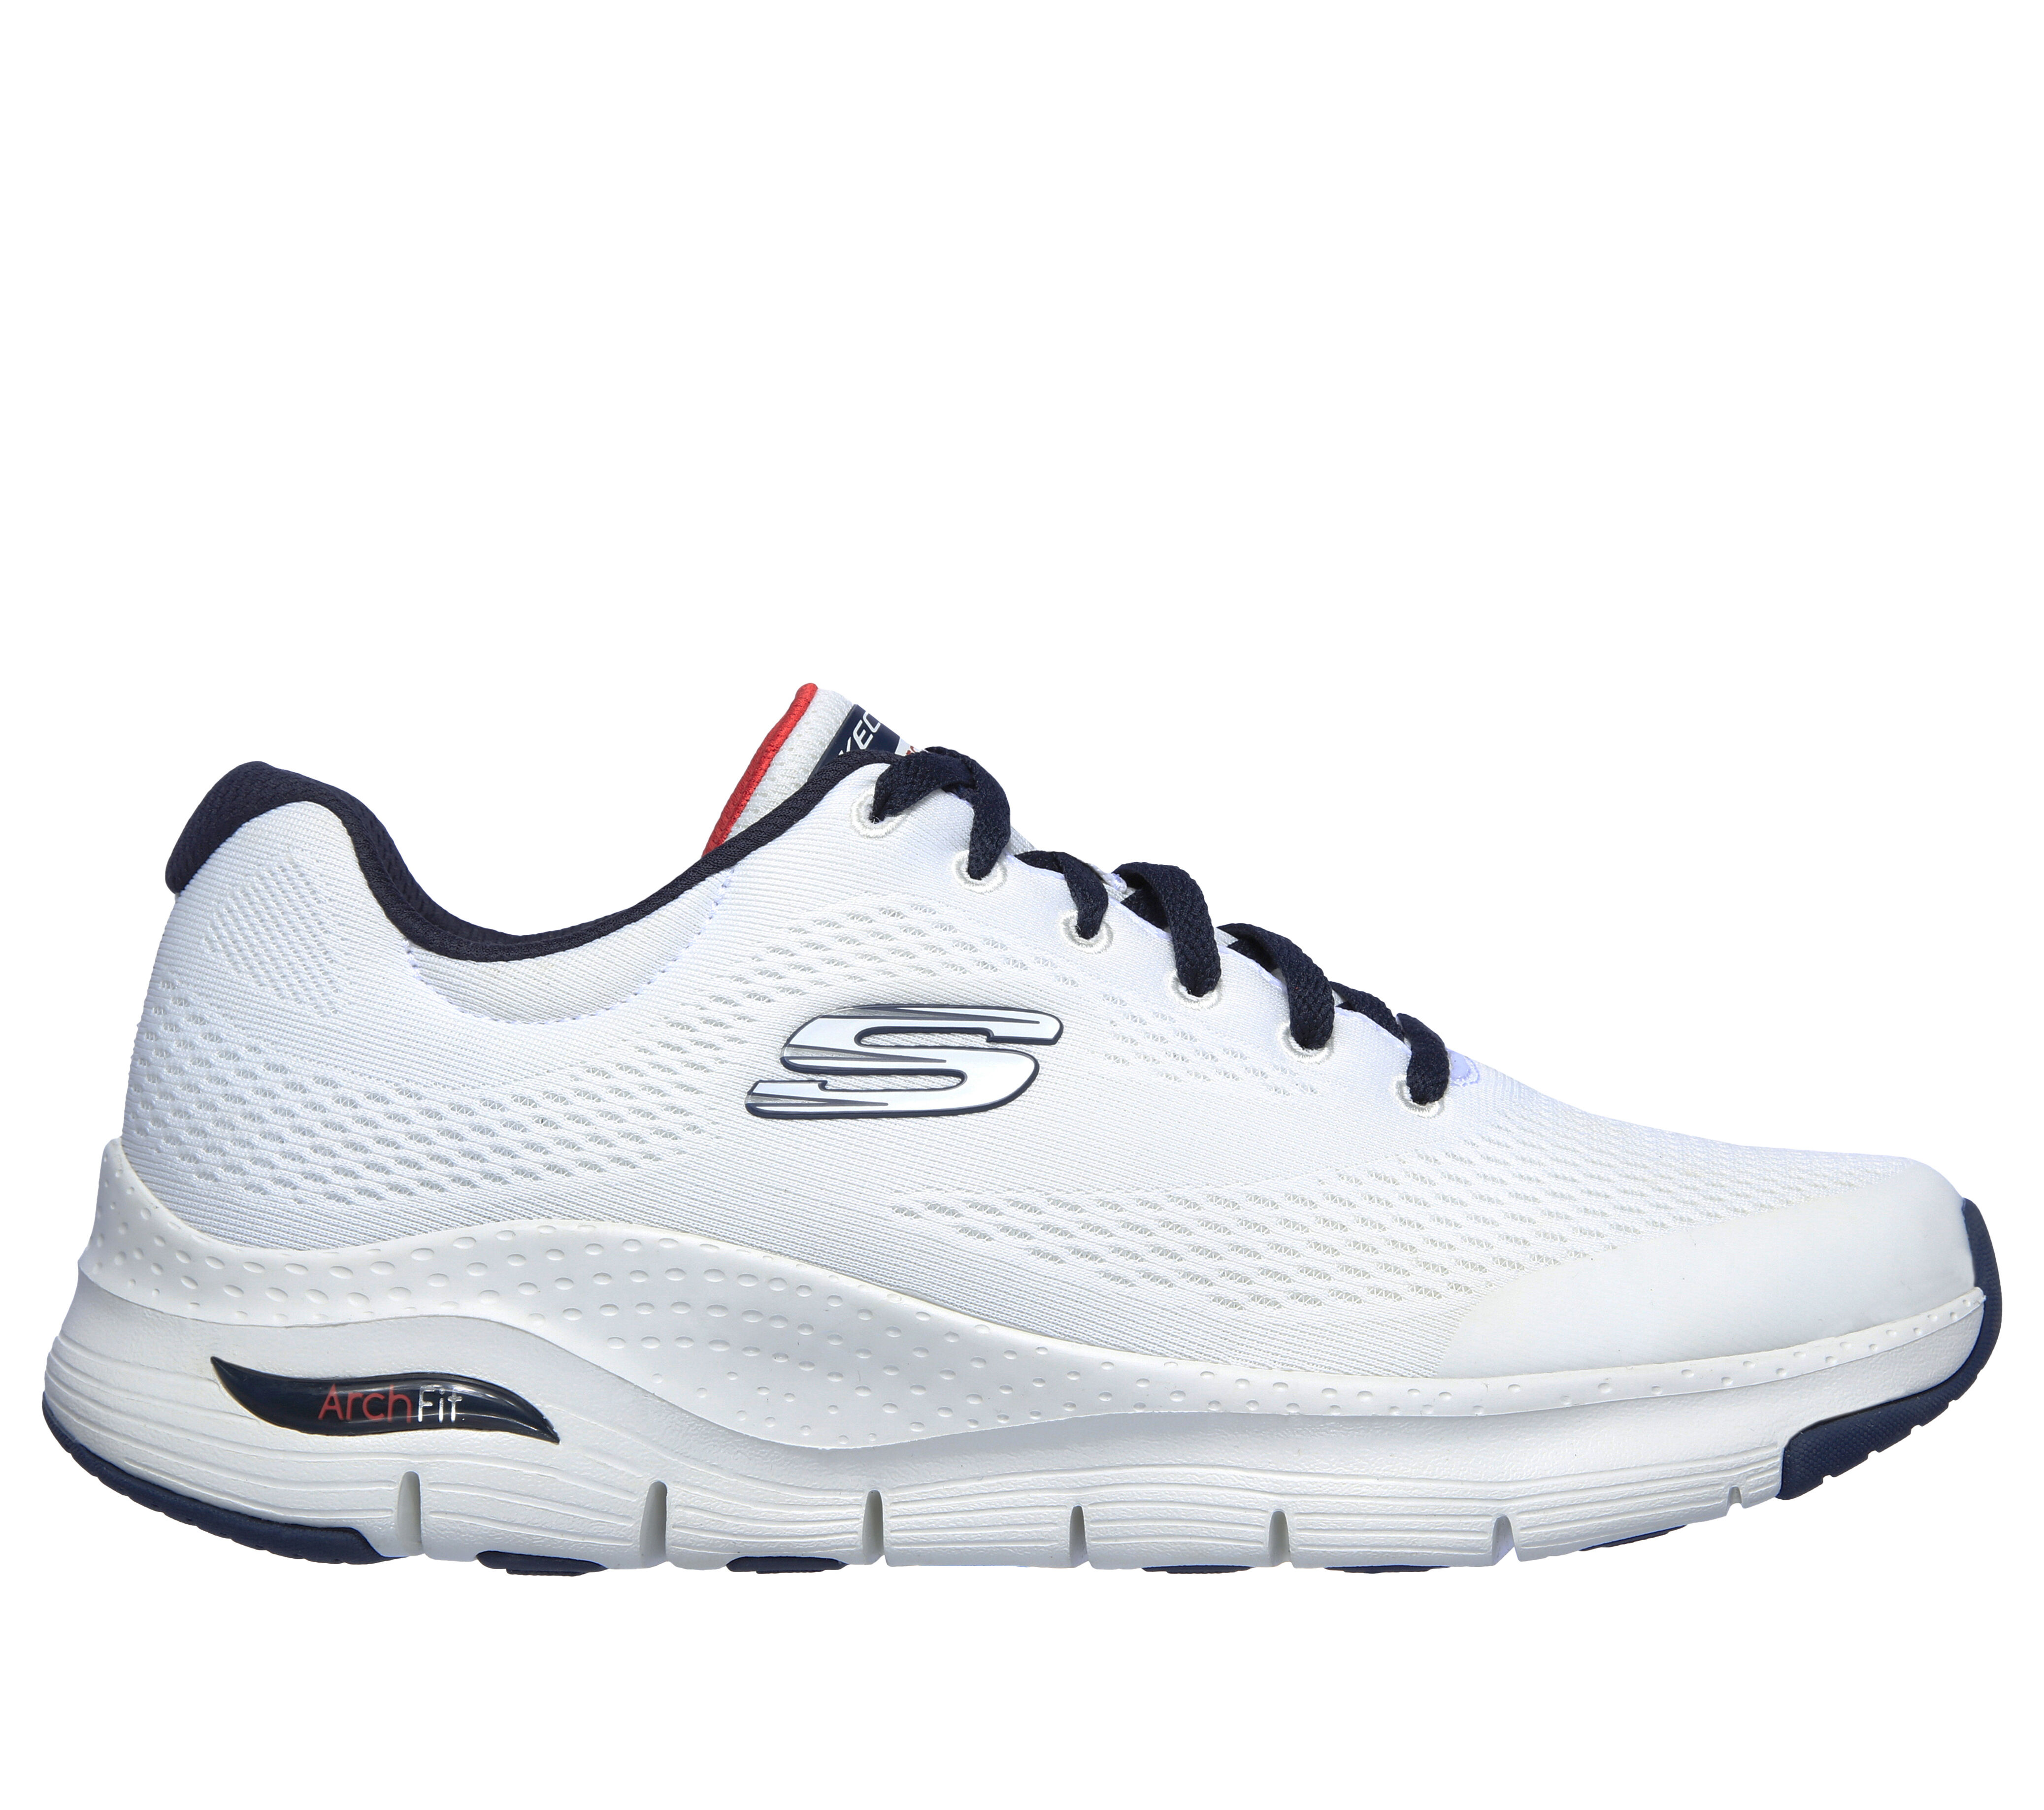 skechers extra wide fit mens shoes